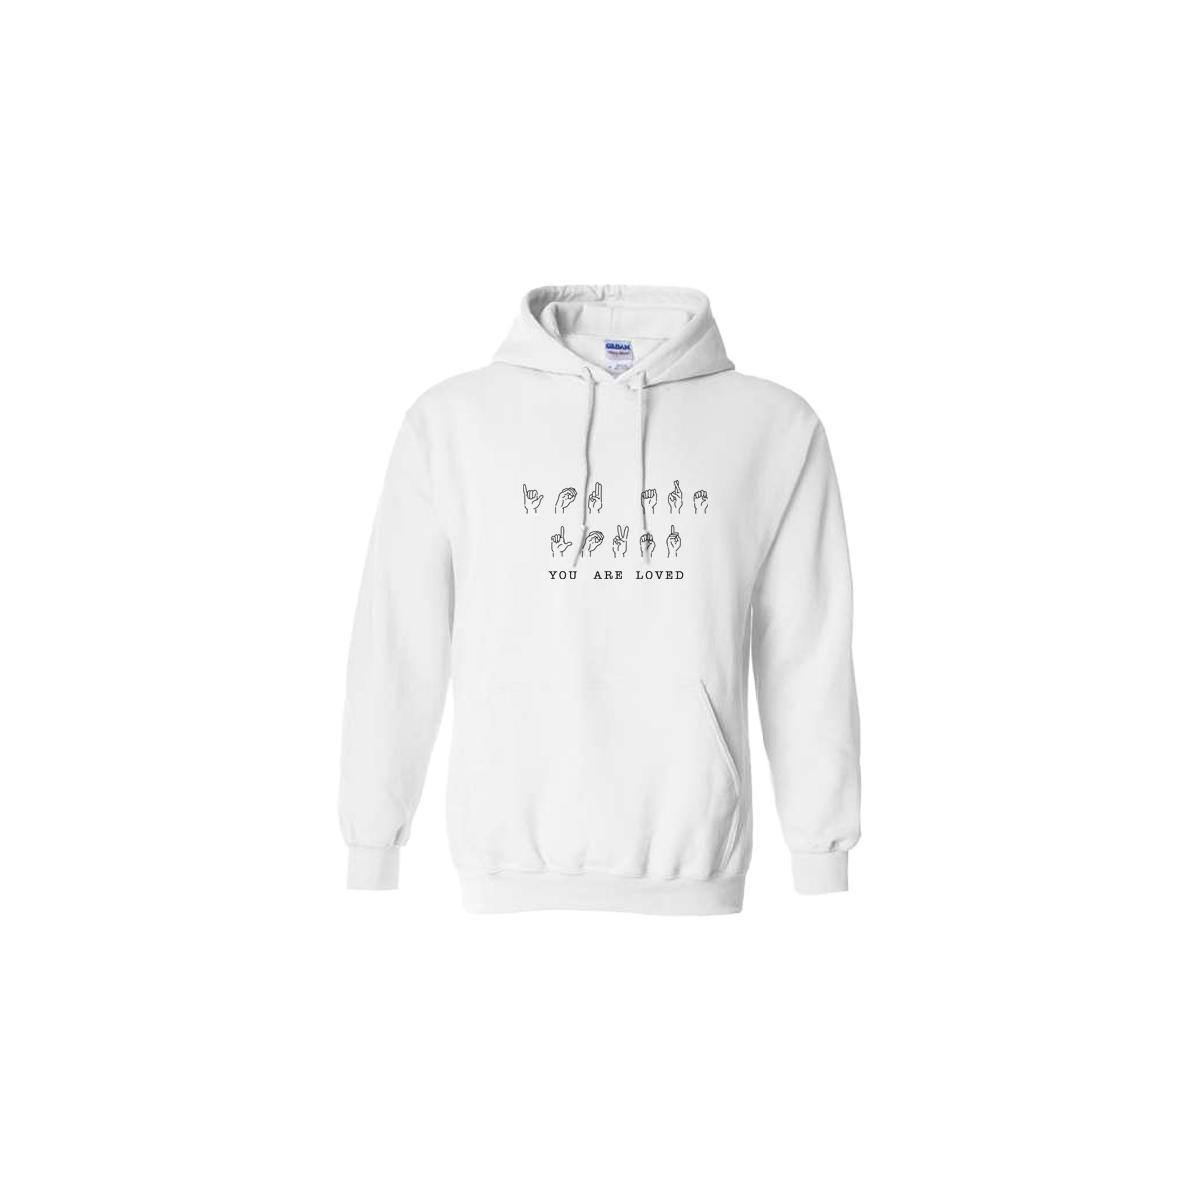 You Are Loved Sign Language Embroidered White Hoodie - Mental Health Awareness Clothing